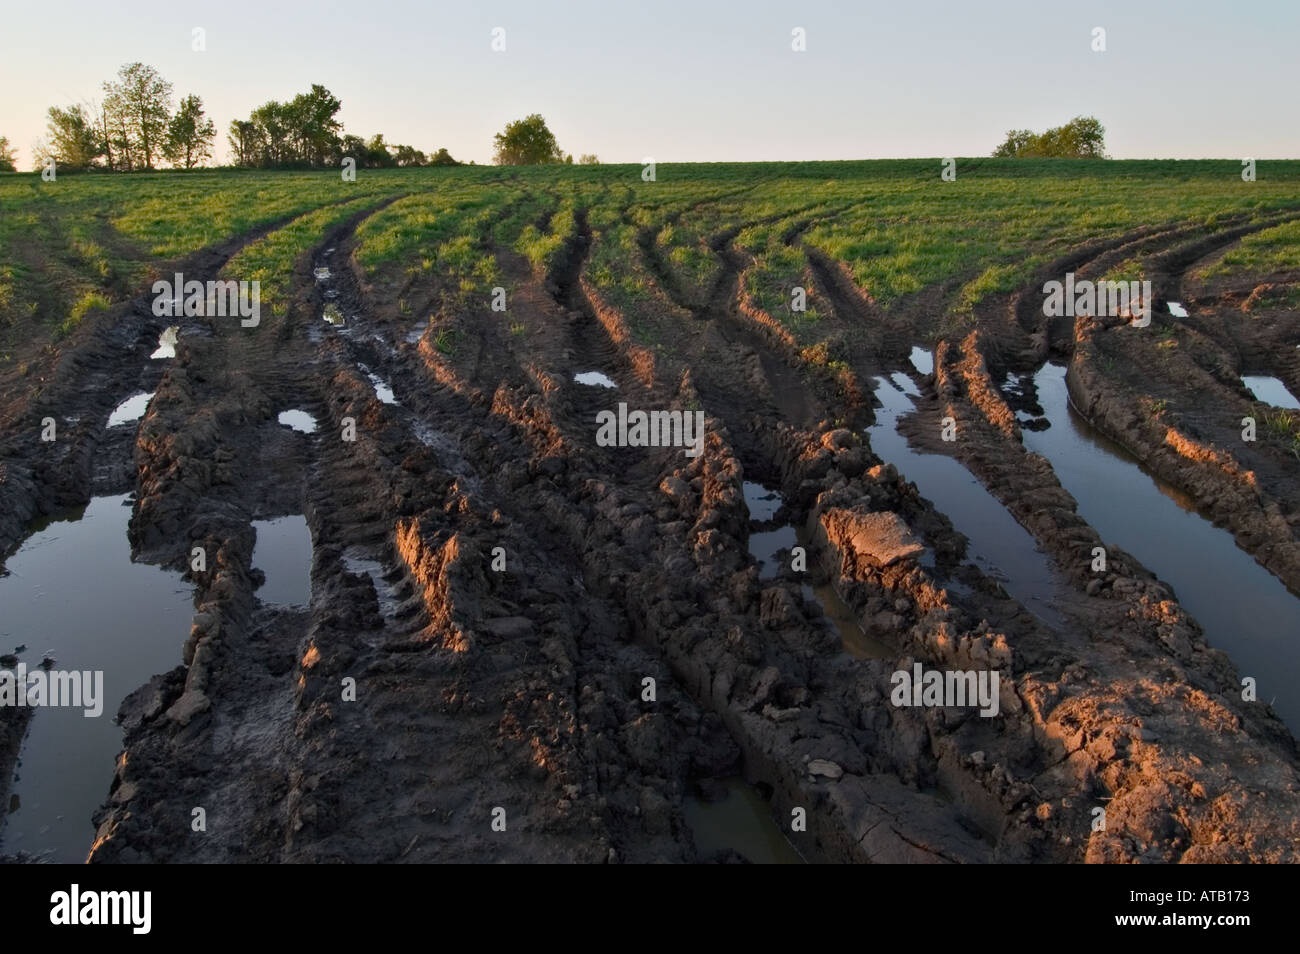 Muddy ruts mark Spring on the farm in upstate New York United States Stock Photo